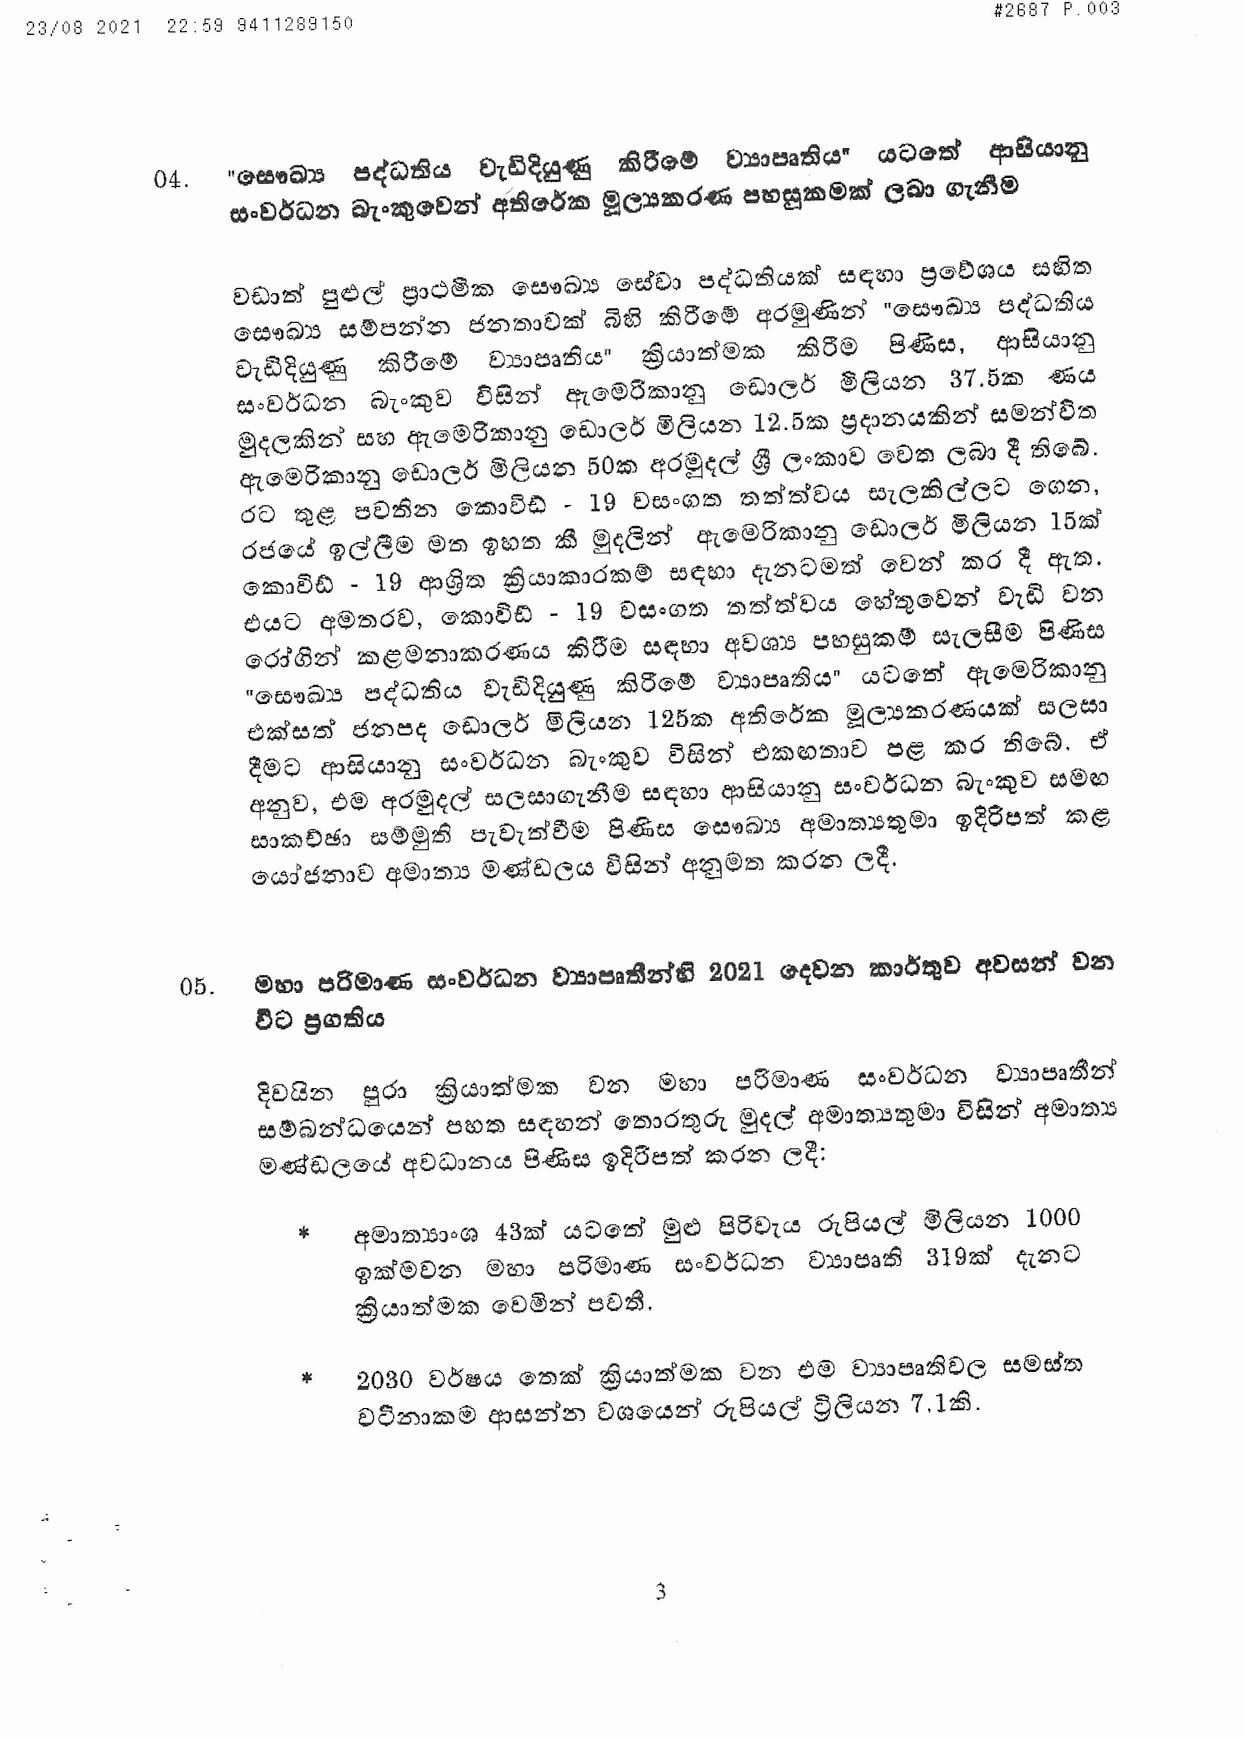 Cabinet Decision on 23.08.2021 page 003